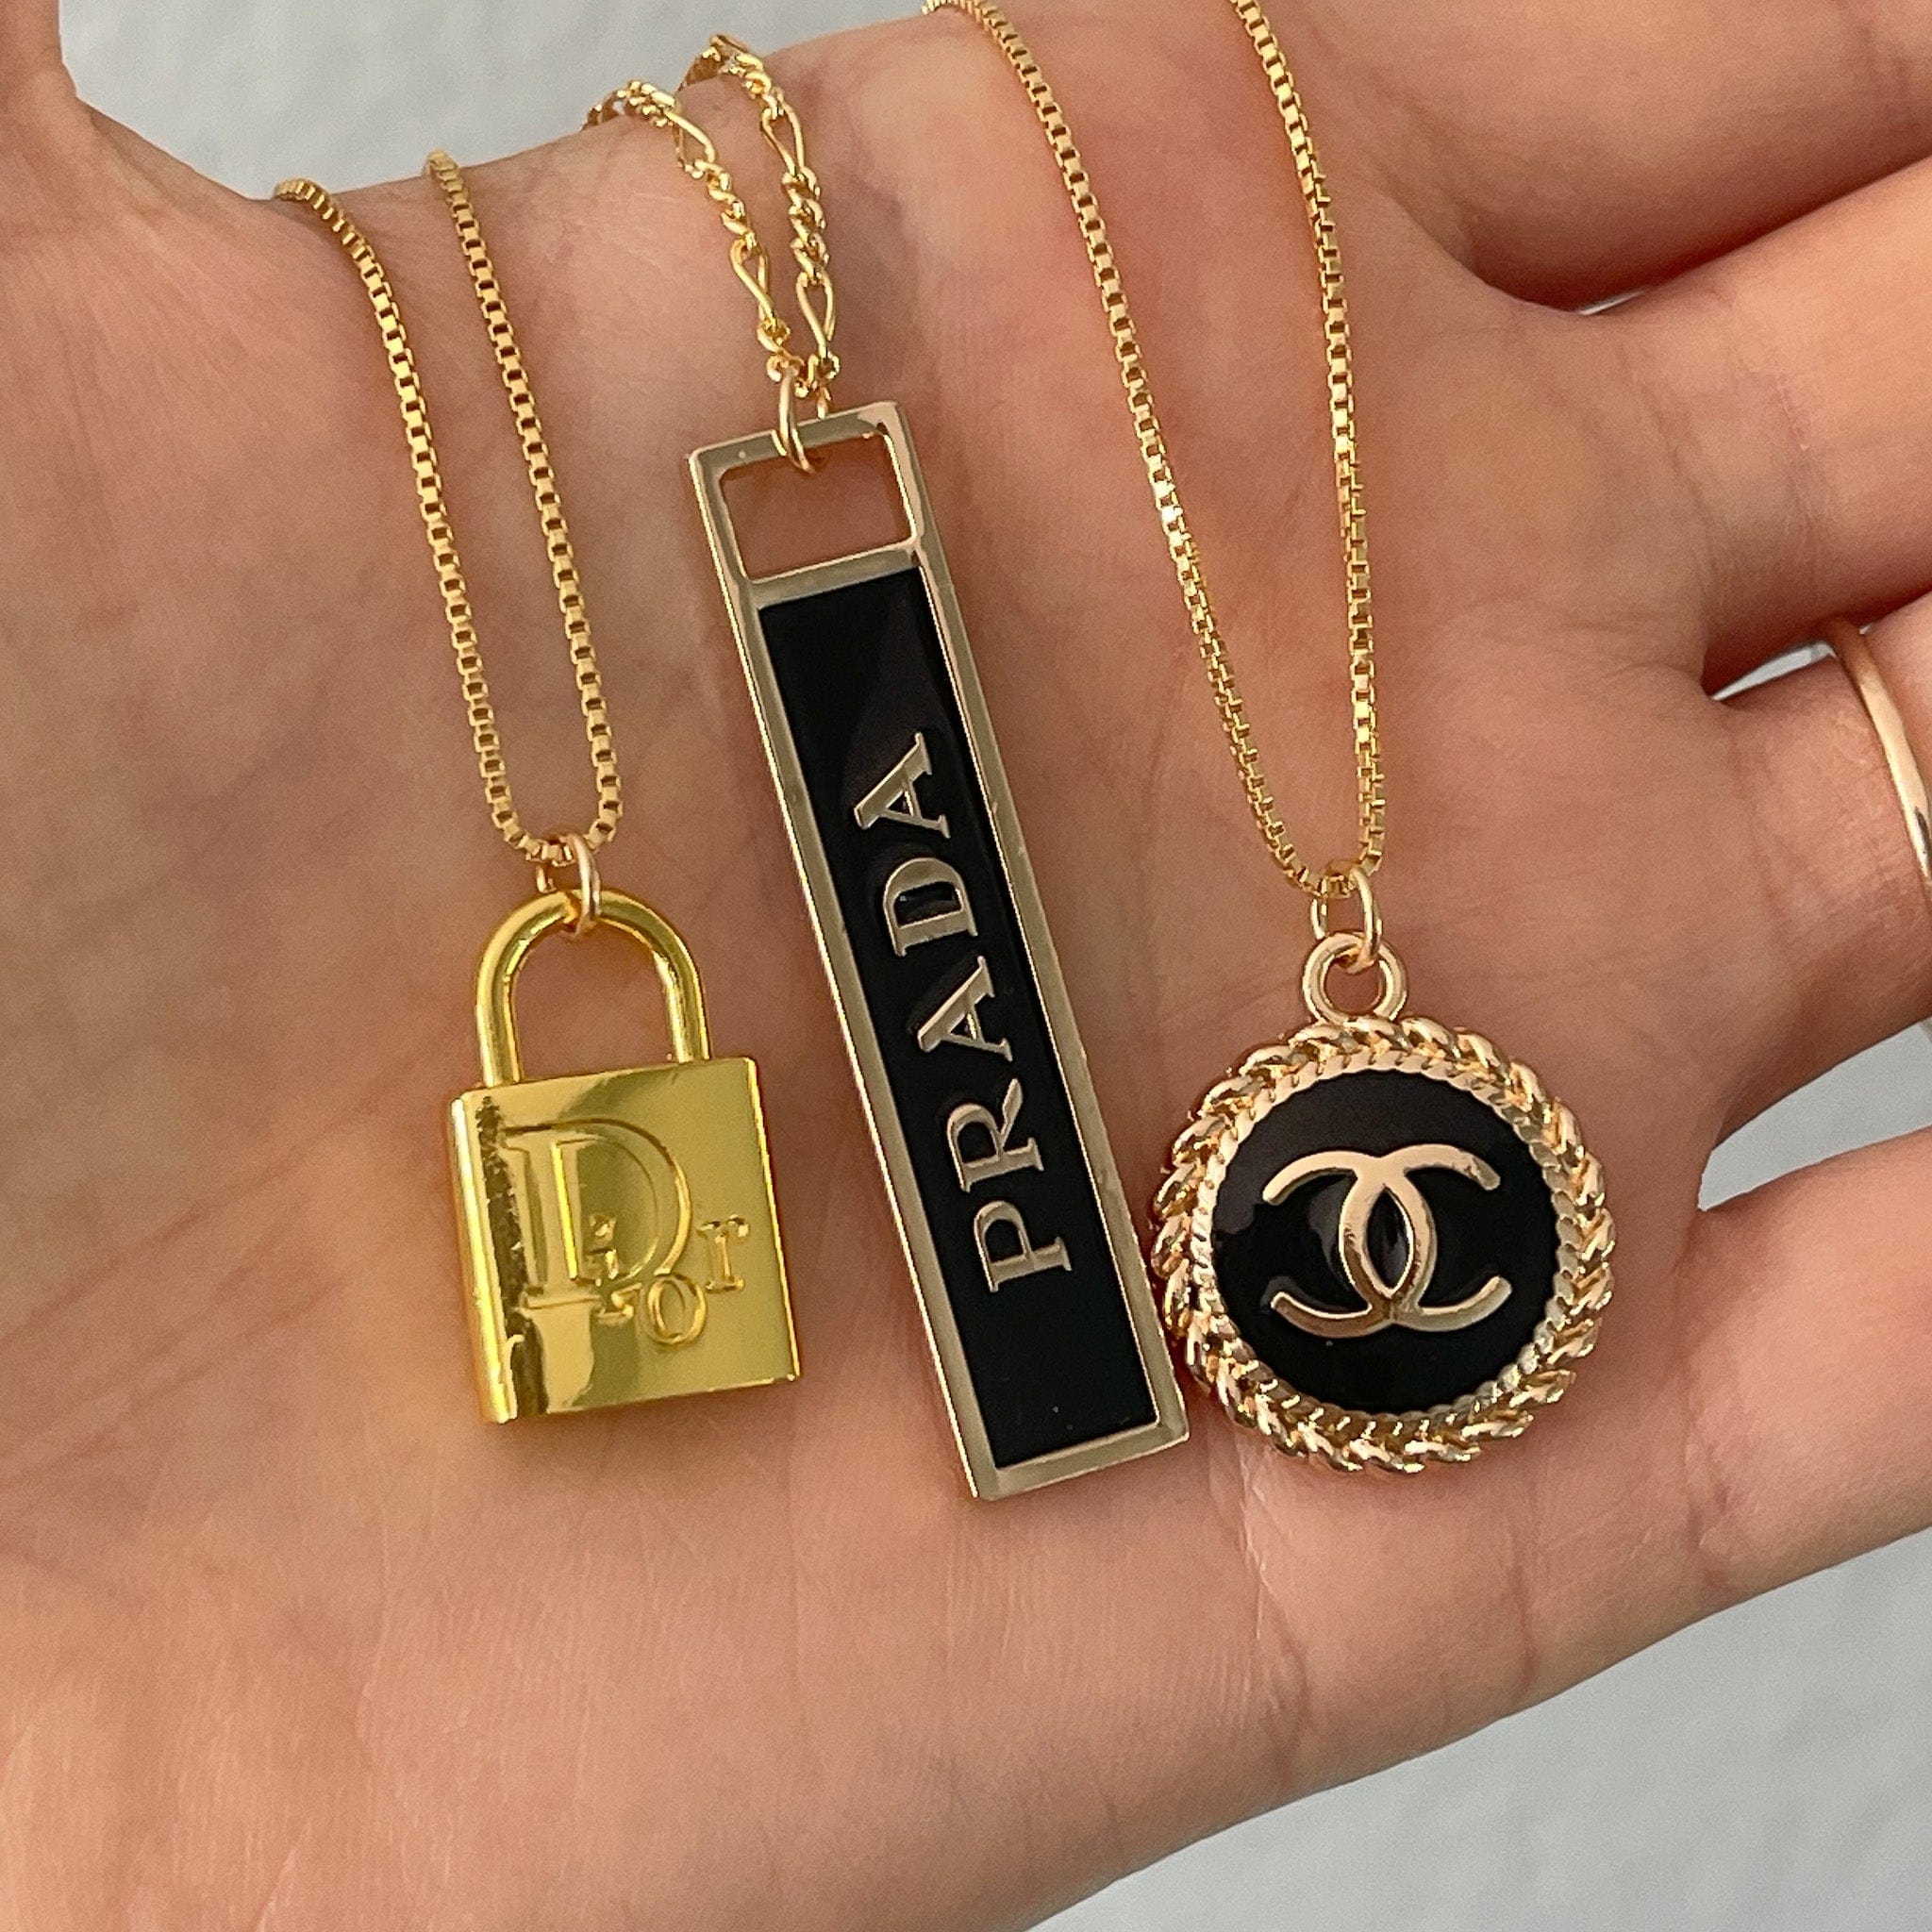 Tory Burch Upcycled Authentic Zipper Pull Pendant